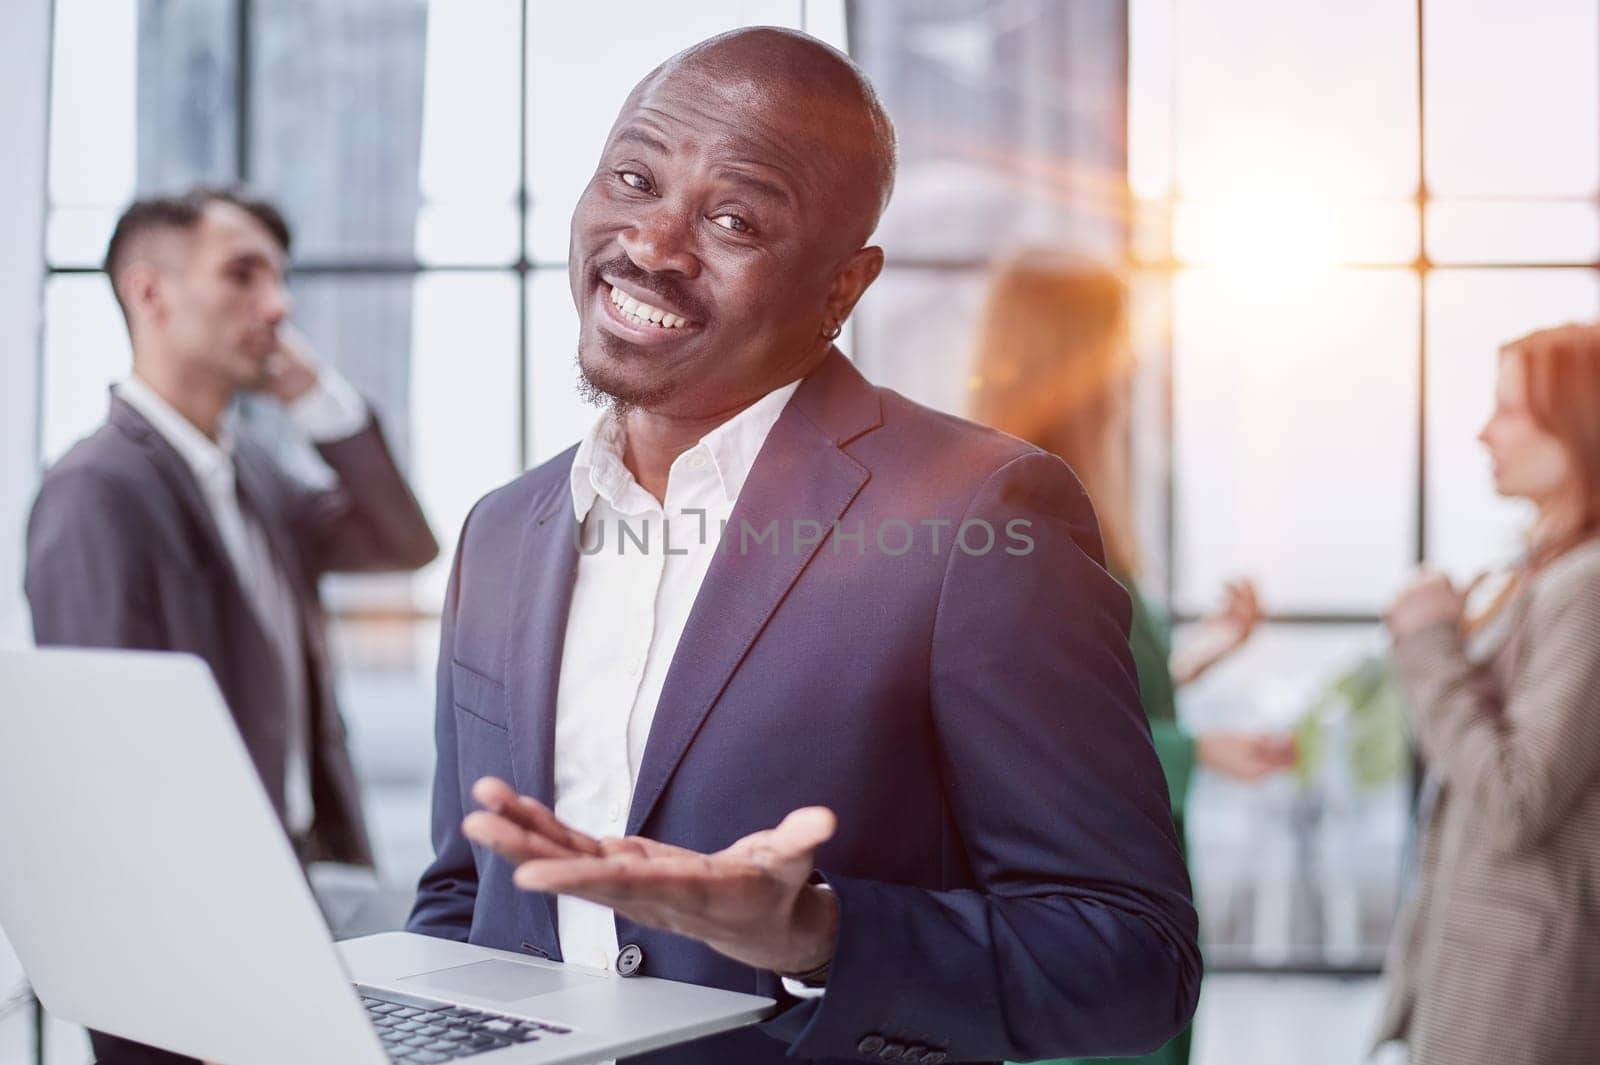 Young African American man in a business suit holding a laptop against the background of his colleagues